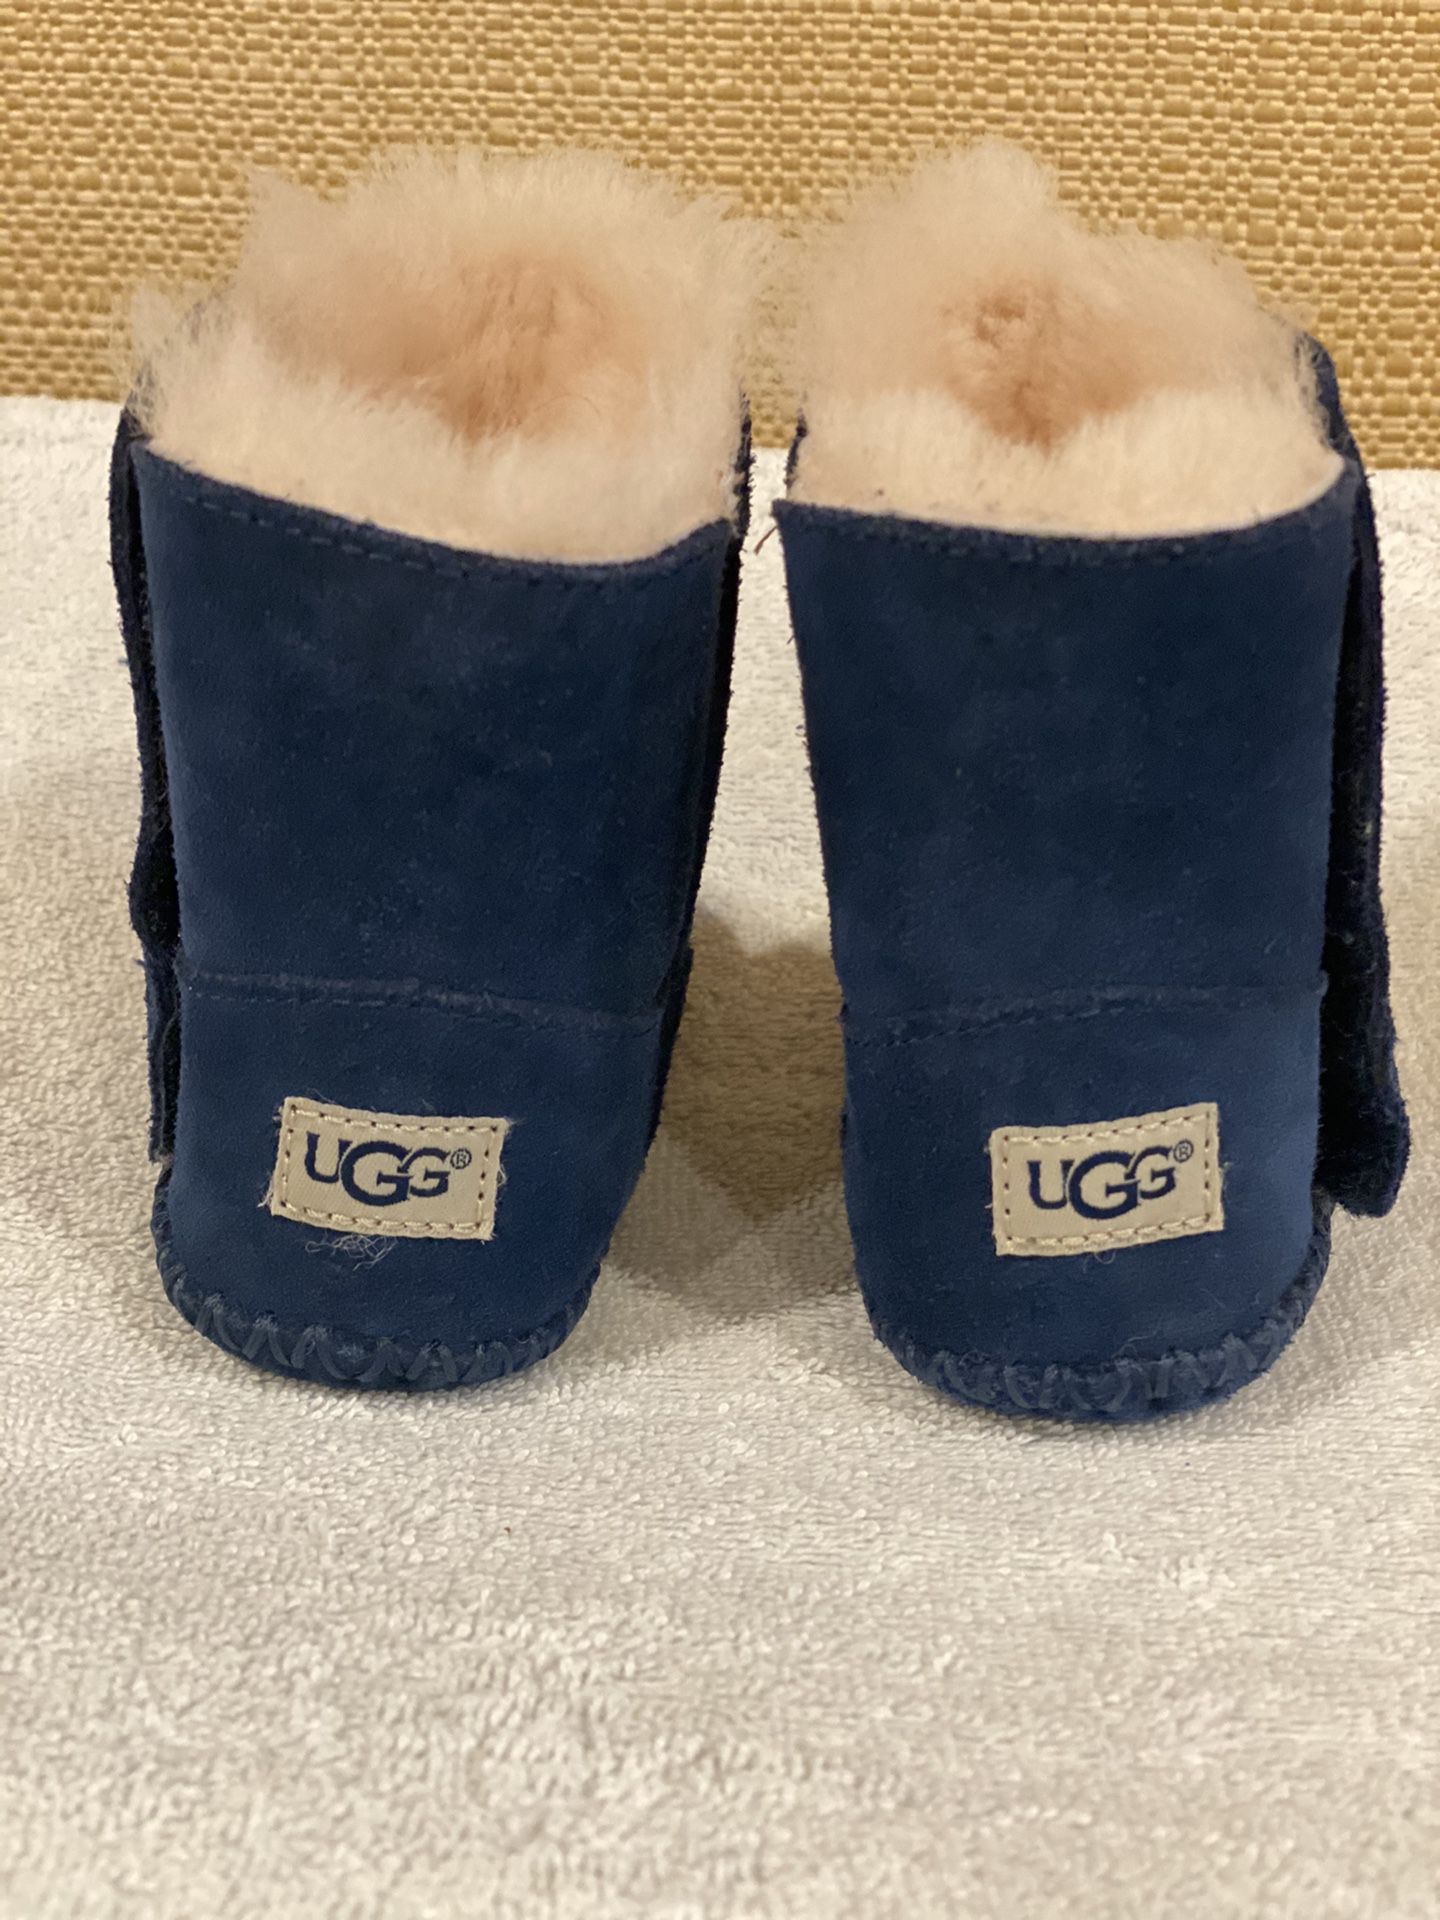 Ugg baby boots size 2/3